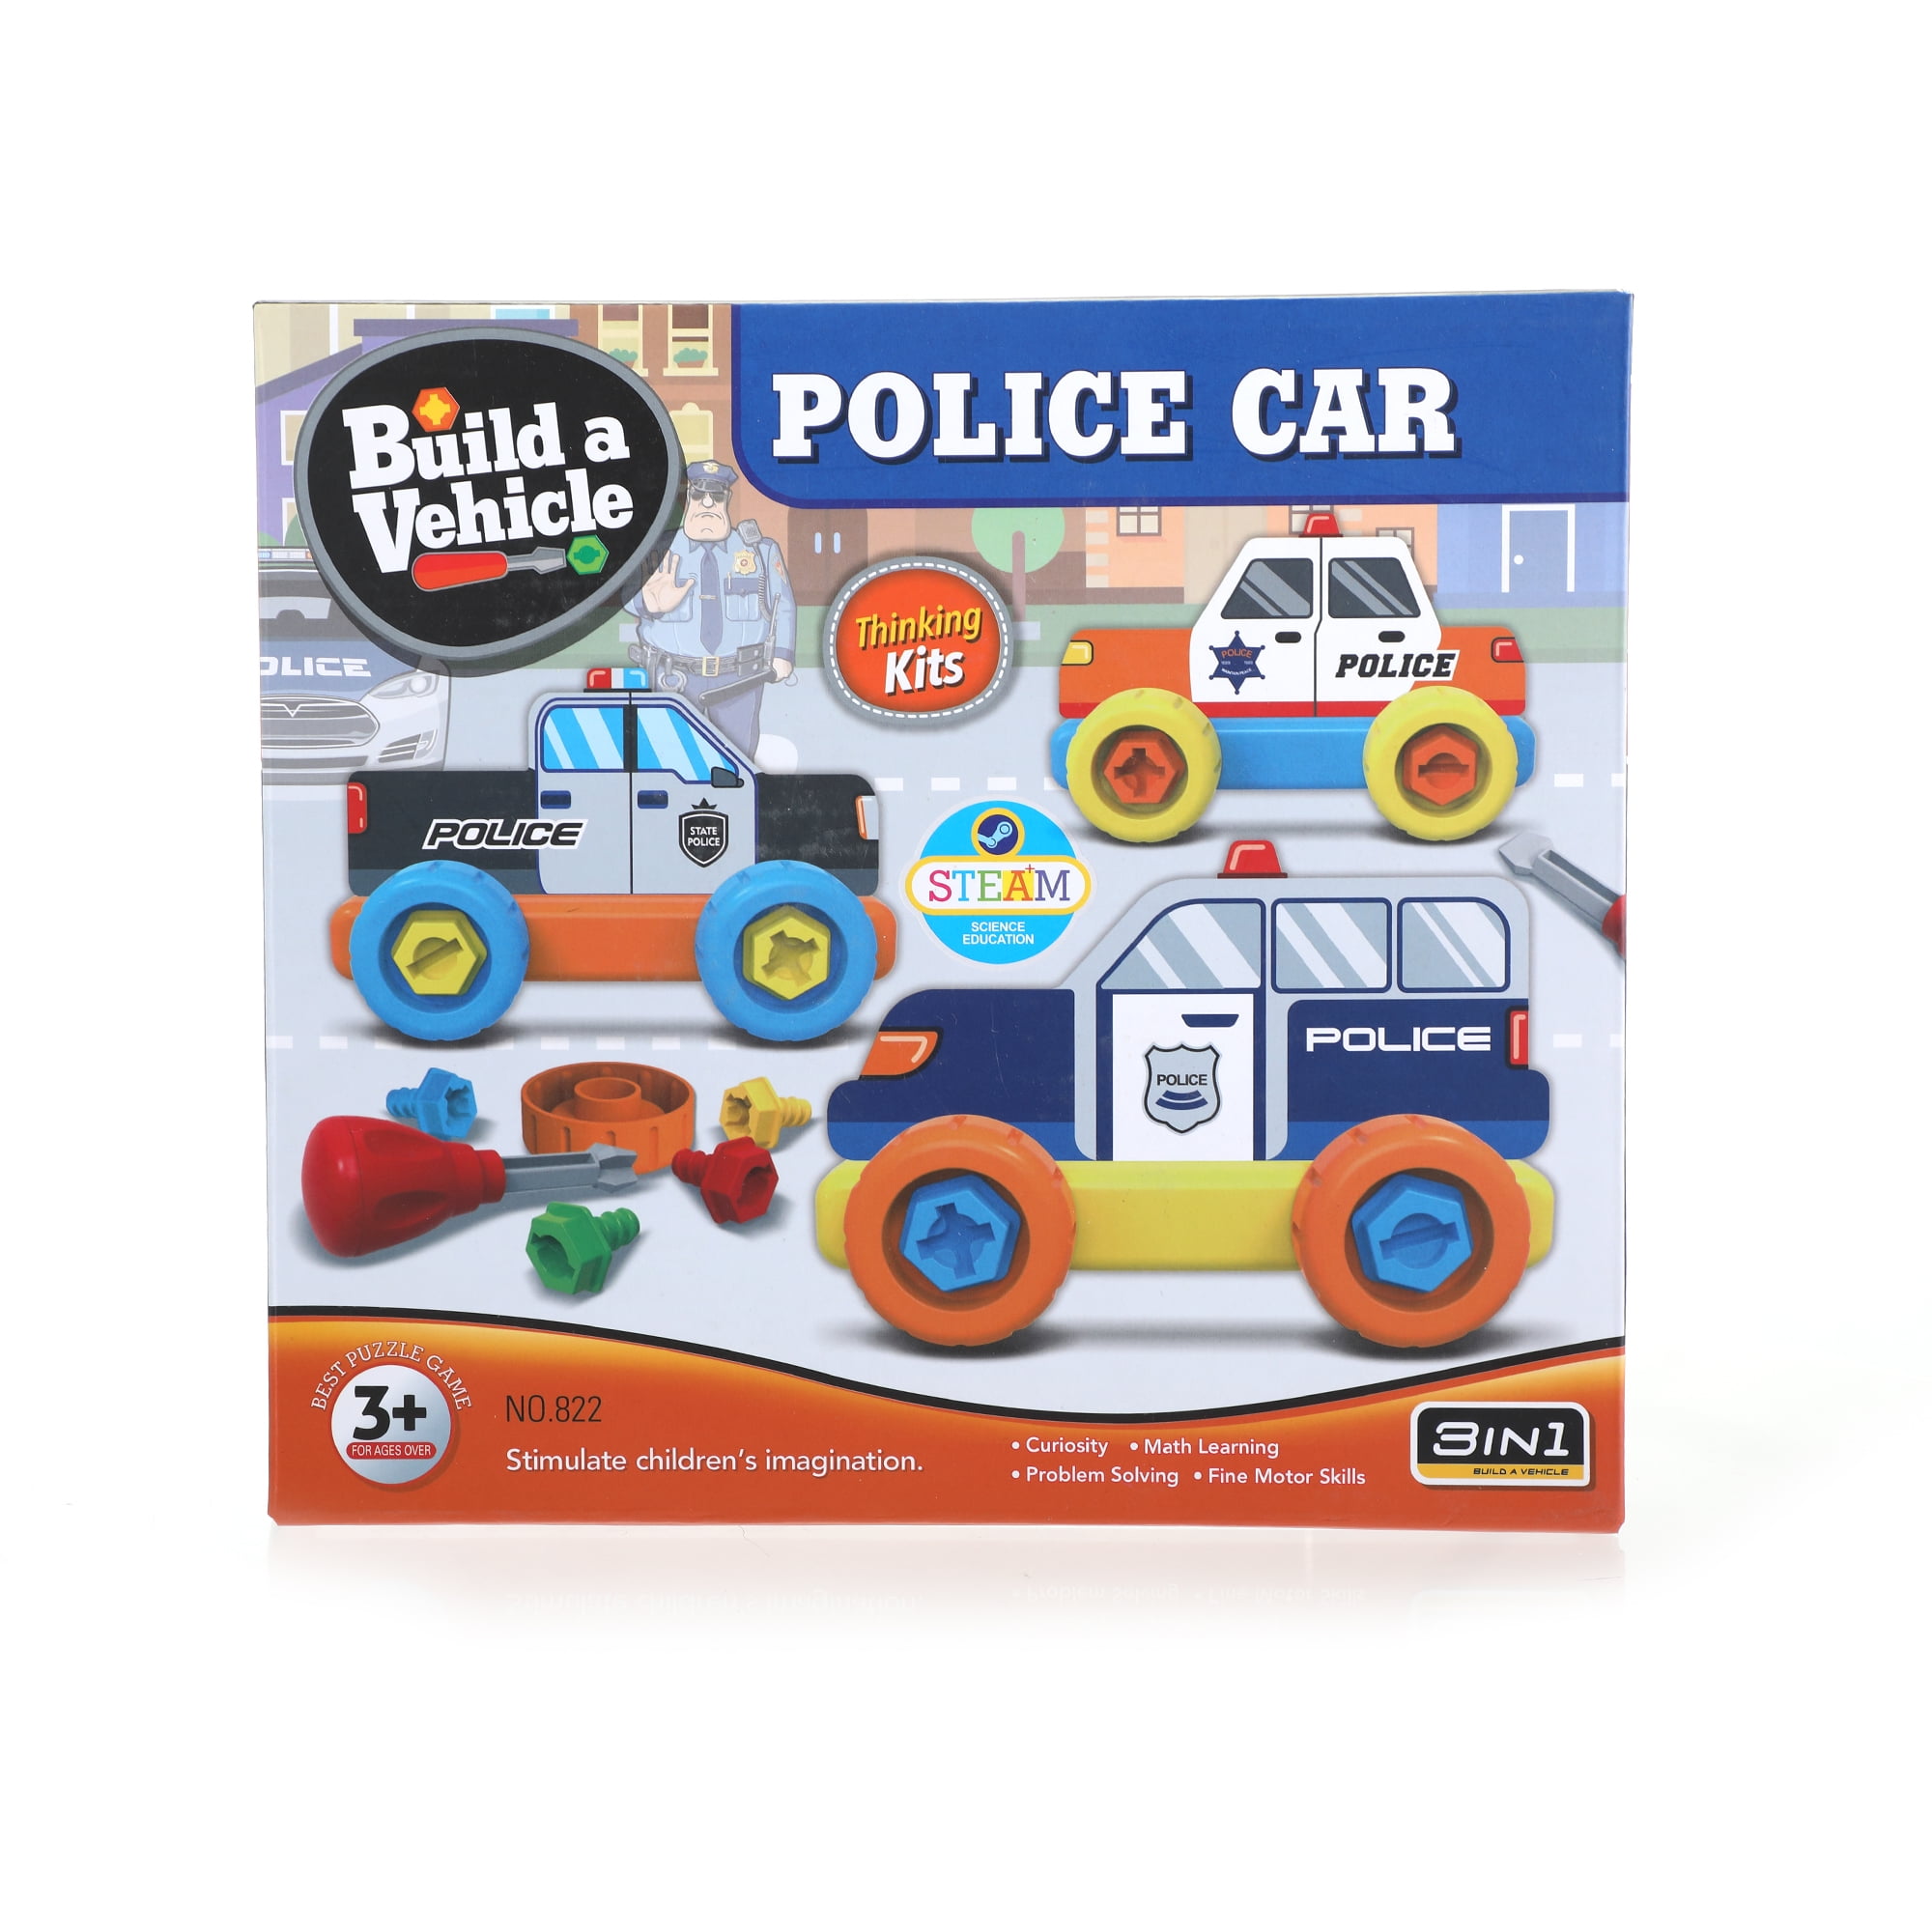 Details about   EDUCATIONAL DEVELOP CHILDREN'S PRACTICAL SKILL SPECIAL POLICE PLAY SET 